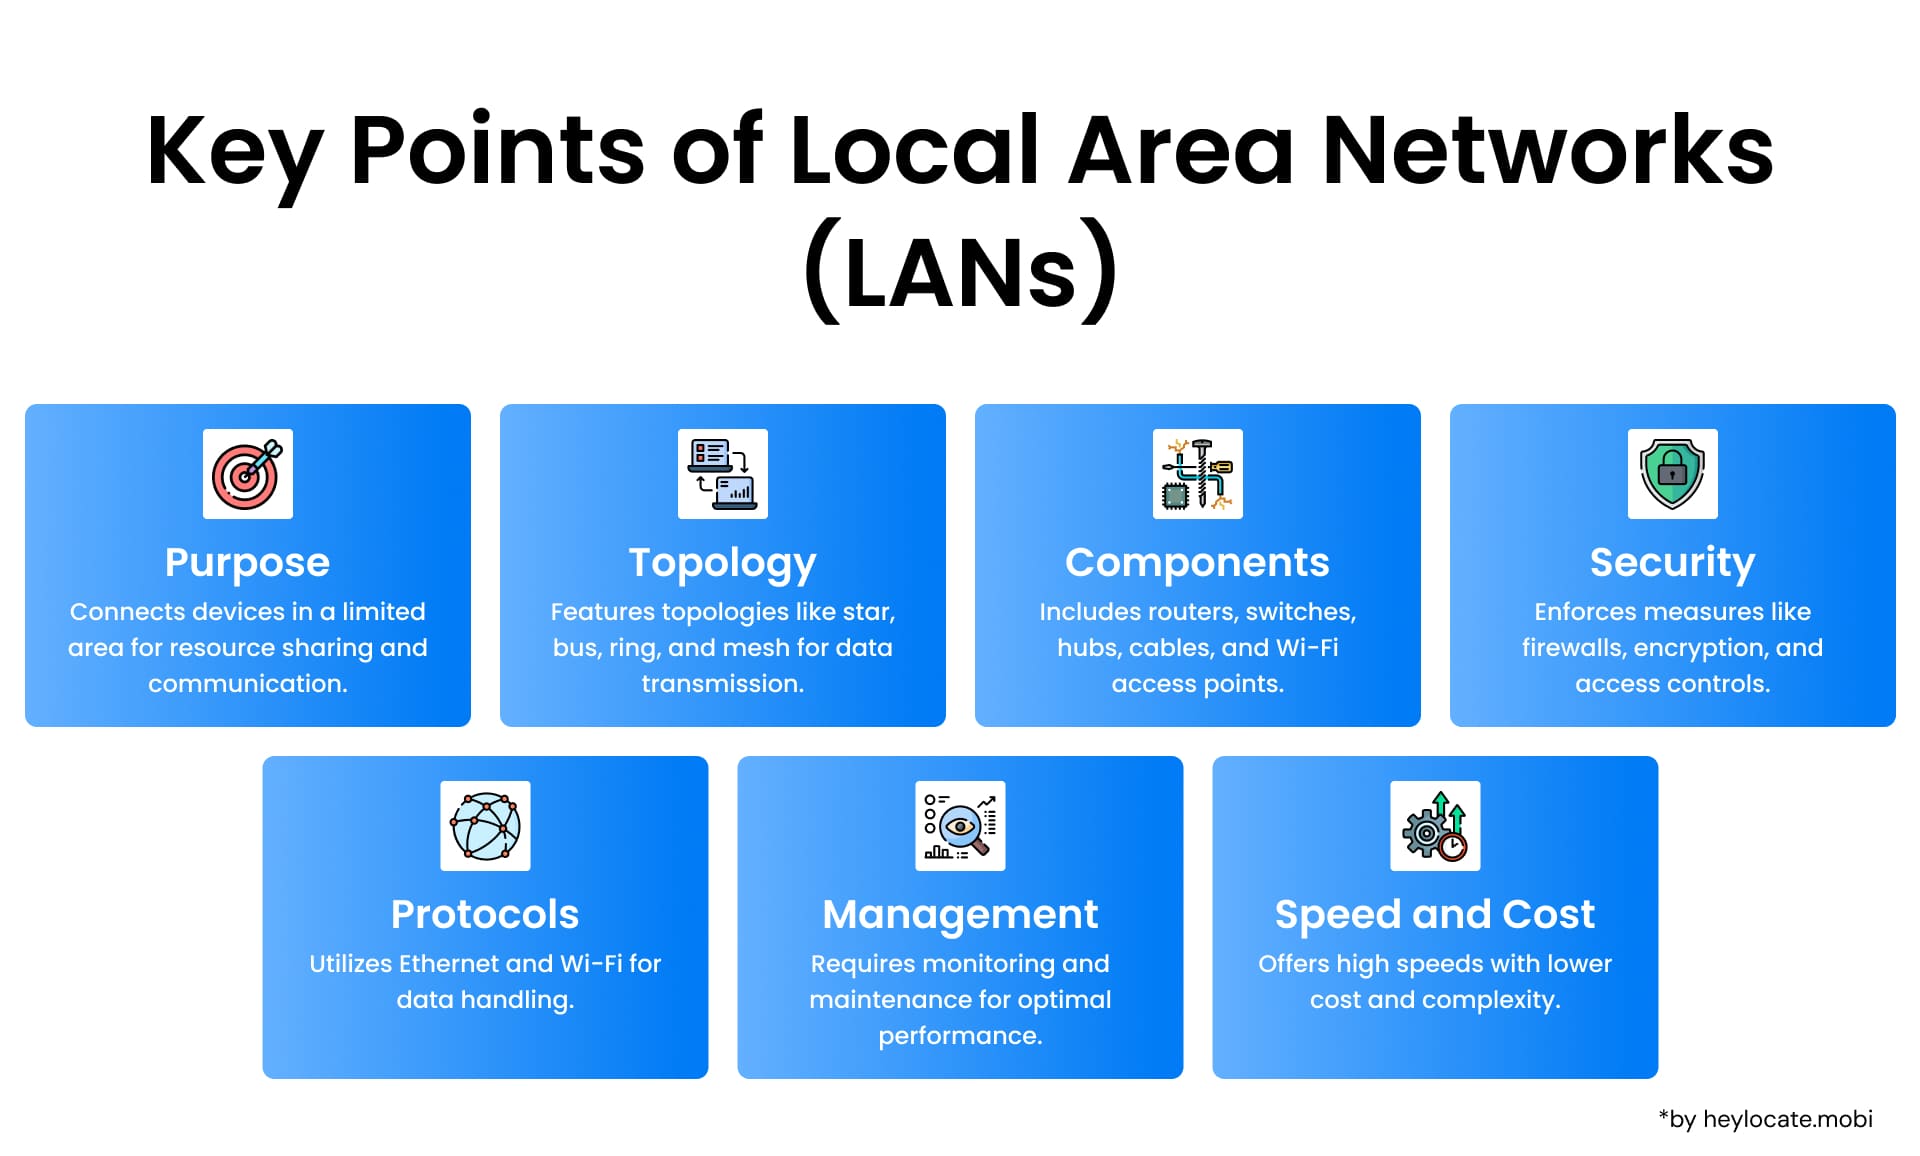 A visual summary of what is LAN highlighting the purpose, topology, components, security, protocols, management, and the balance of speed and cost in LANs